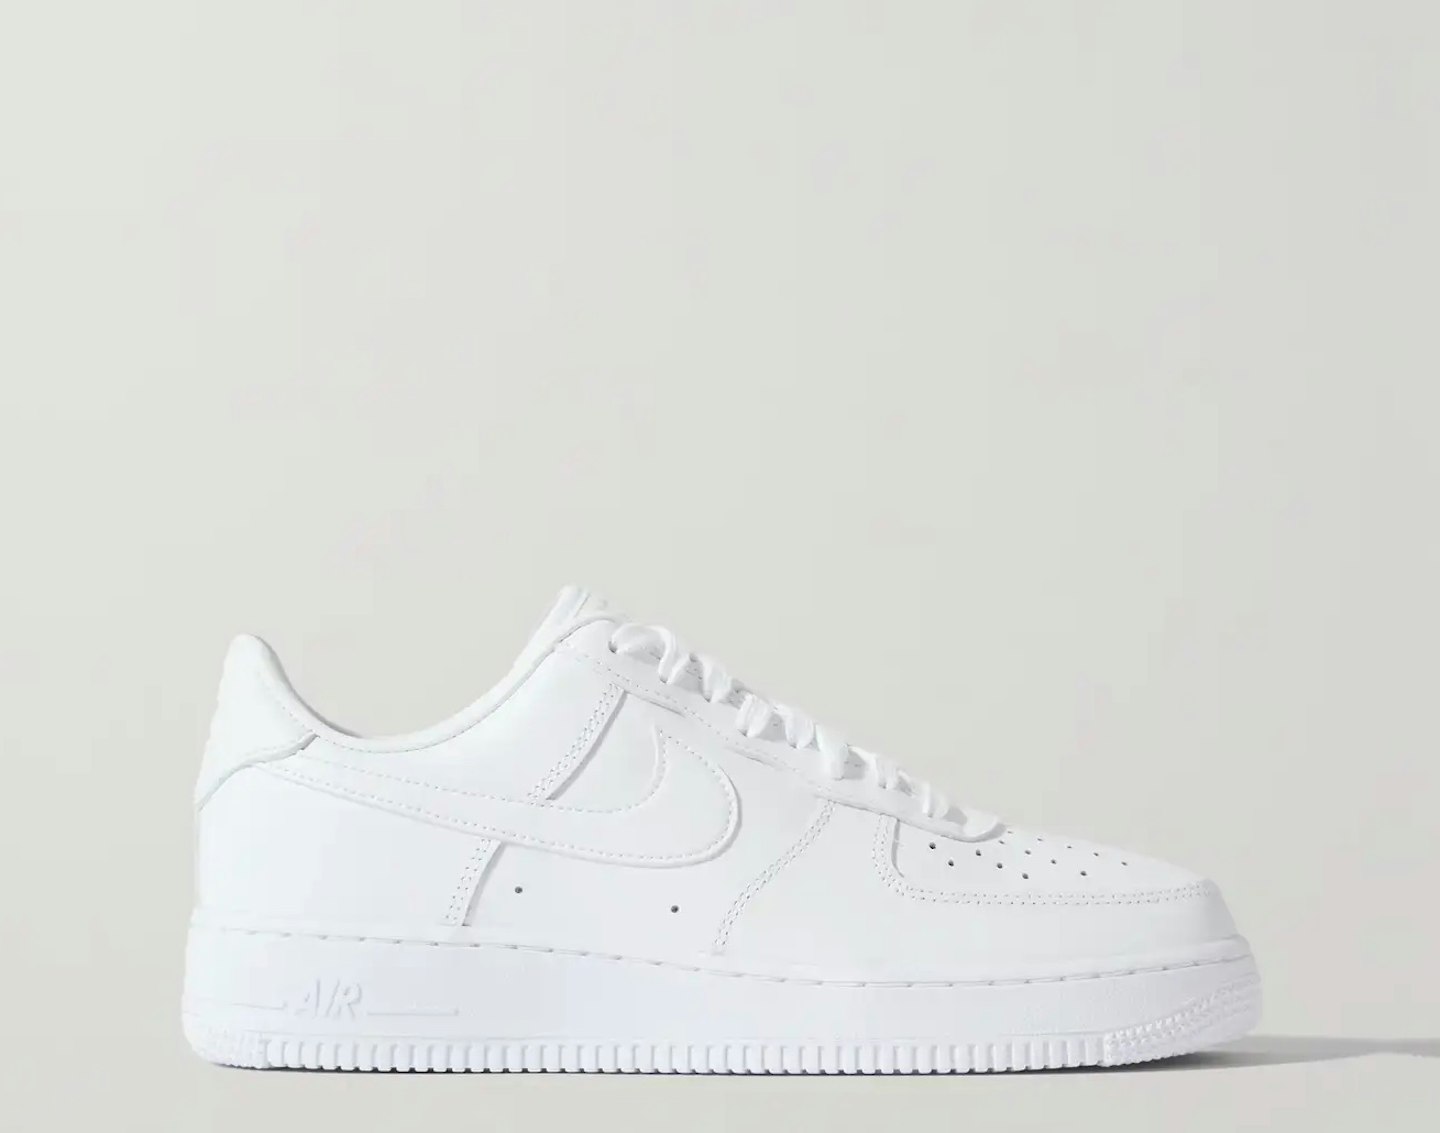 Nike's Air Force 1 '07 Fresh leather sneakers